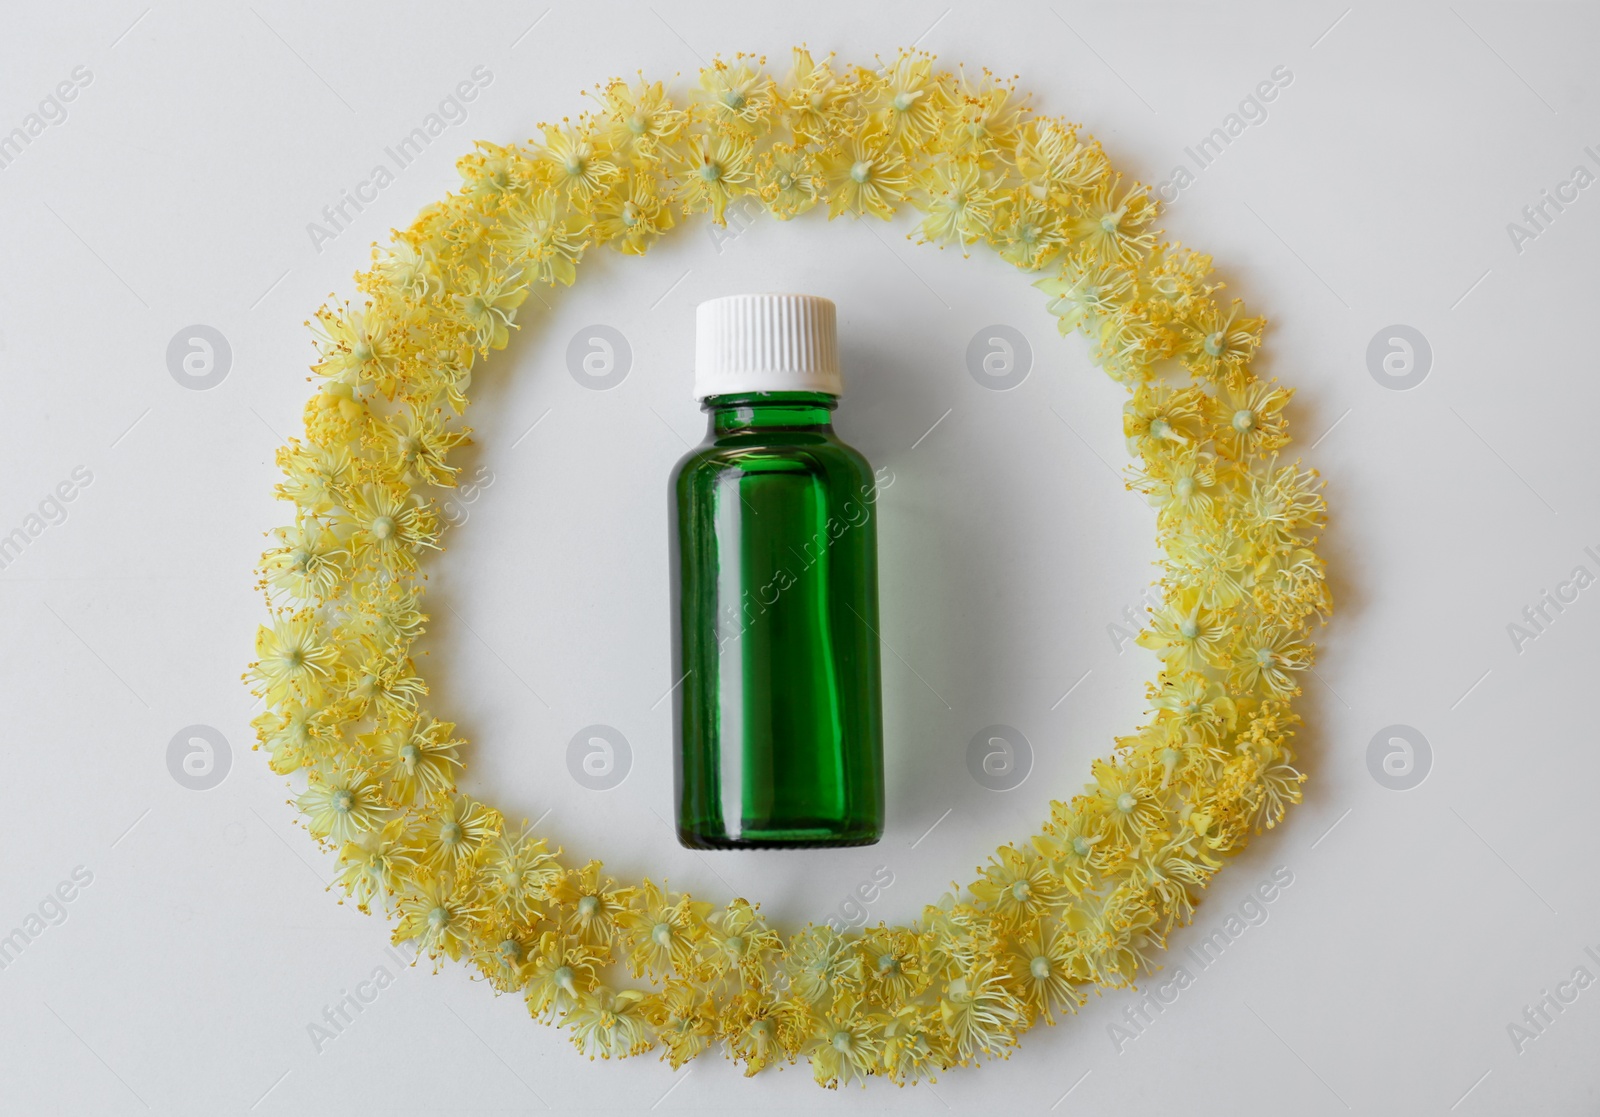 Photo of Bottle of essential oil and linden blossoms on white background, flat lay